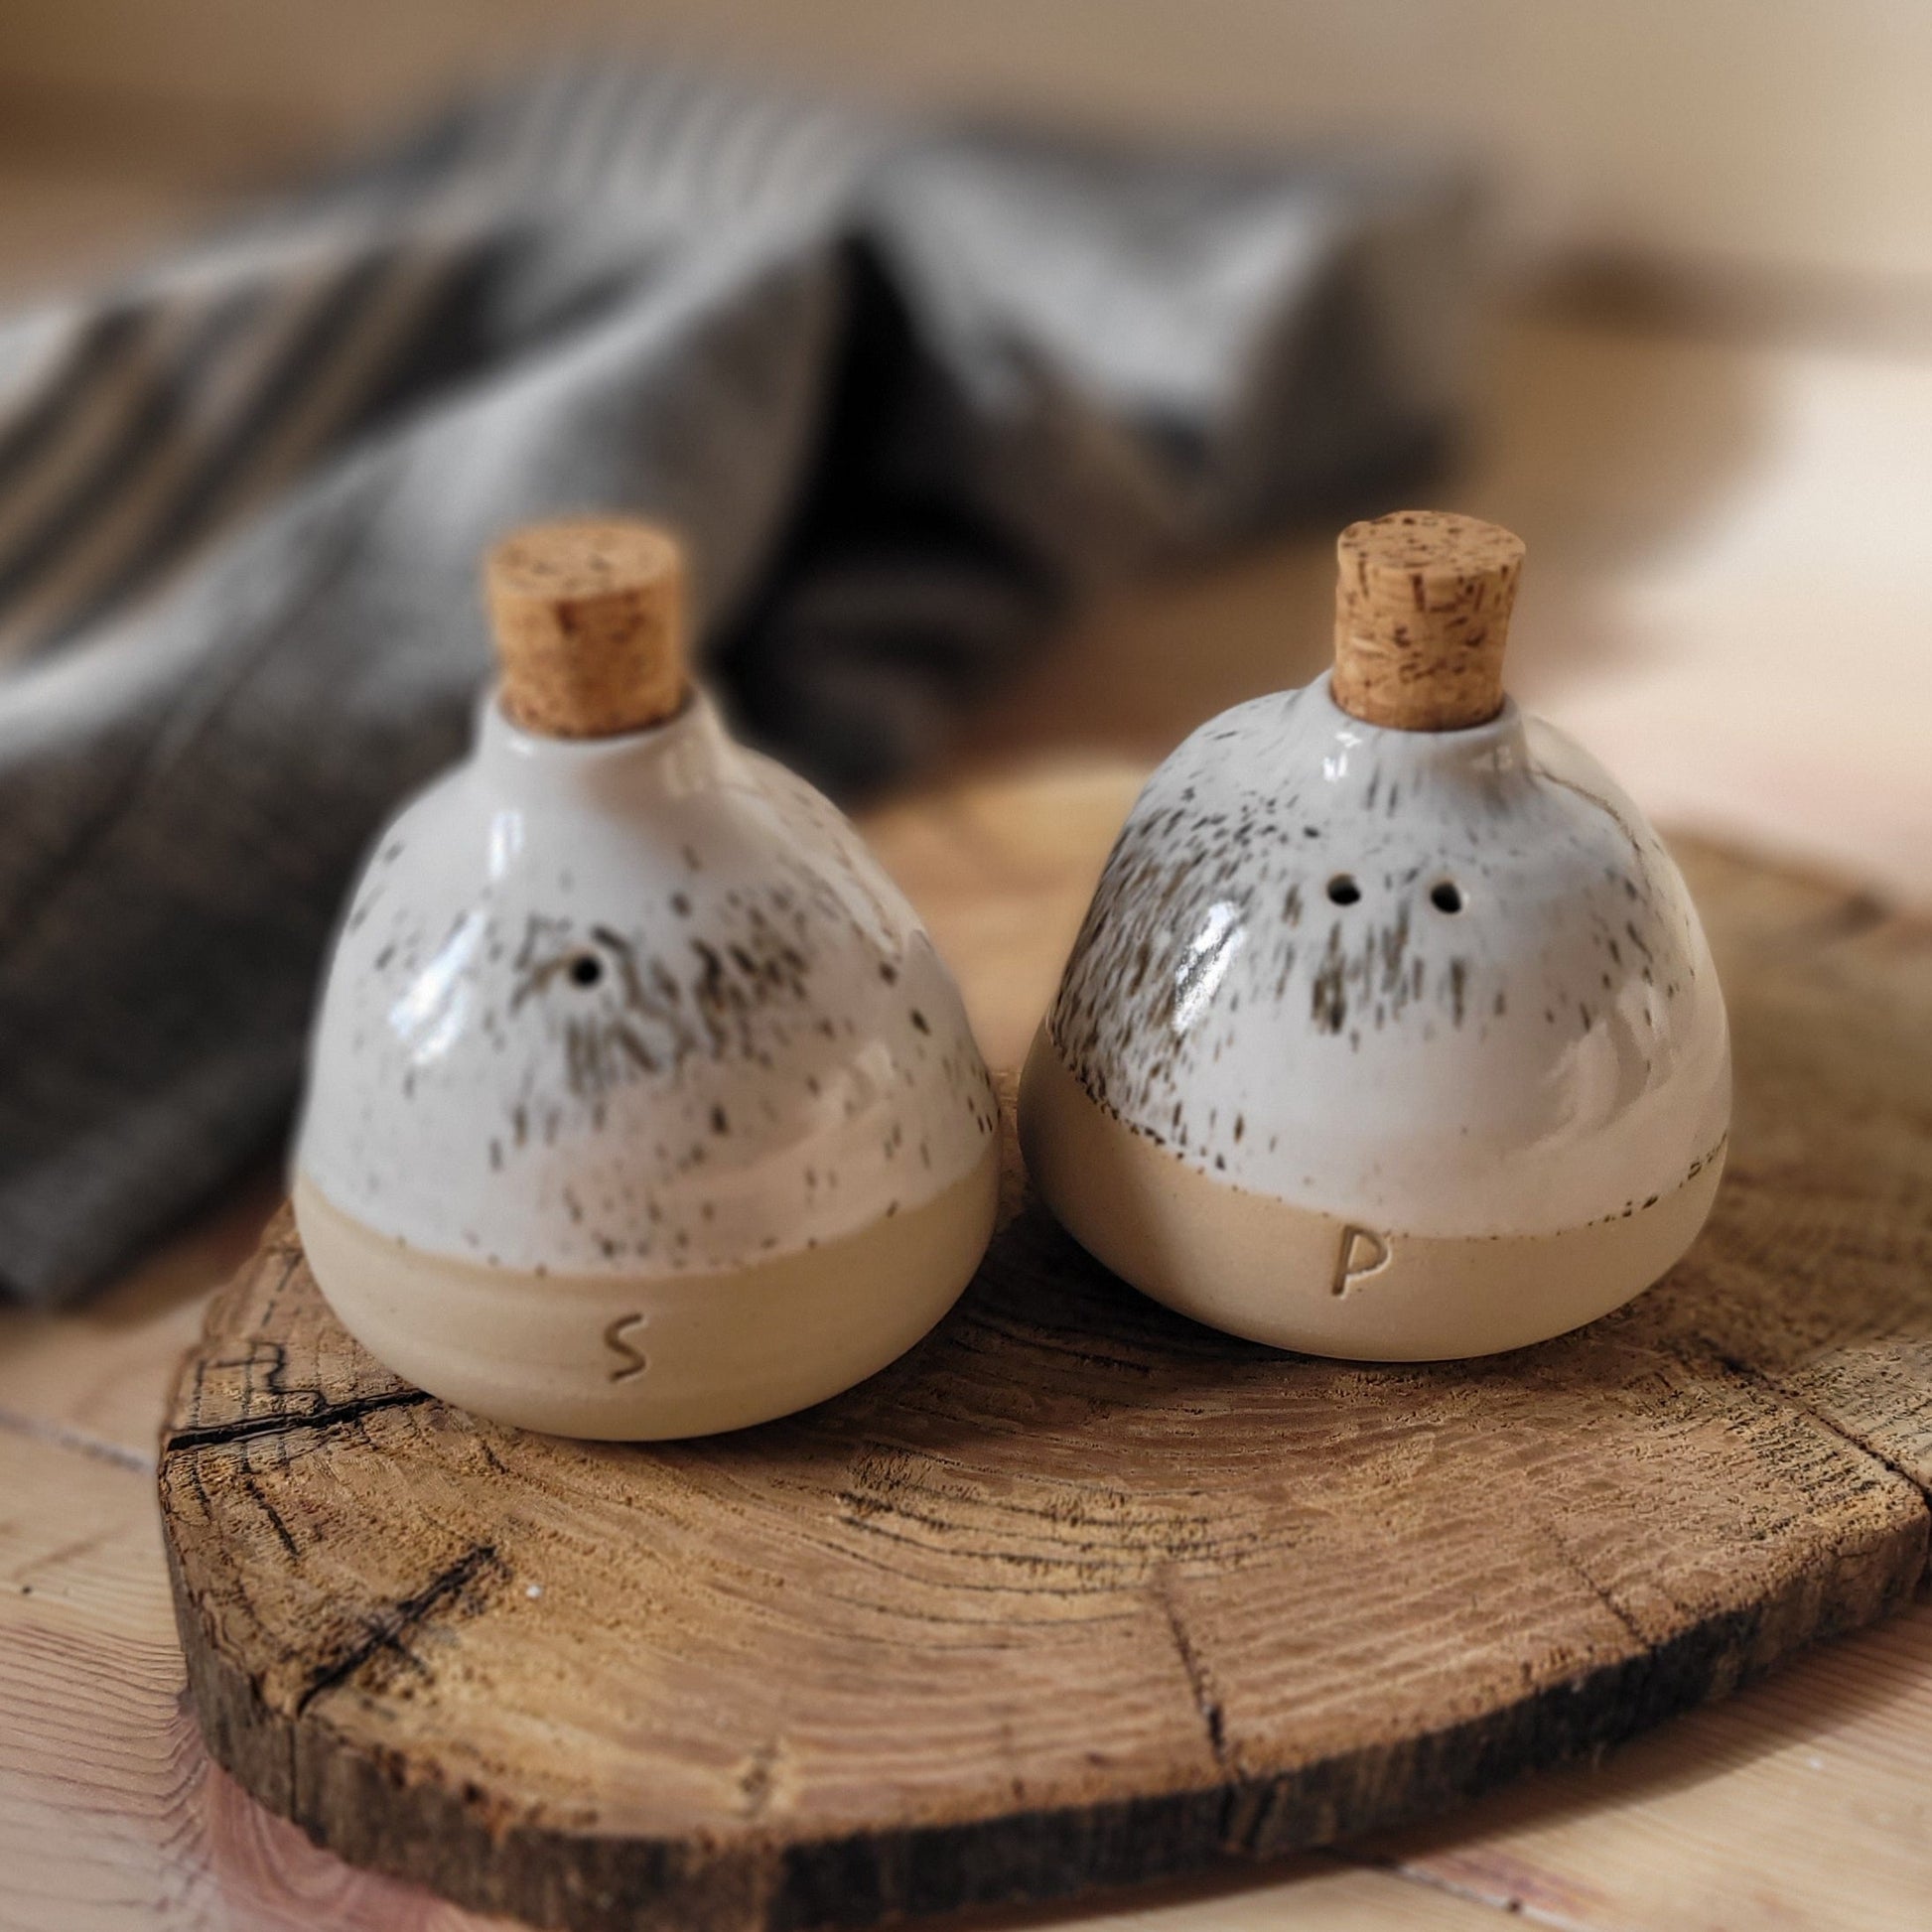 Handmade Salt & Pepper Shakers: Uniquely beautiful set for seasoning your food.